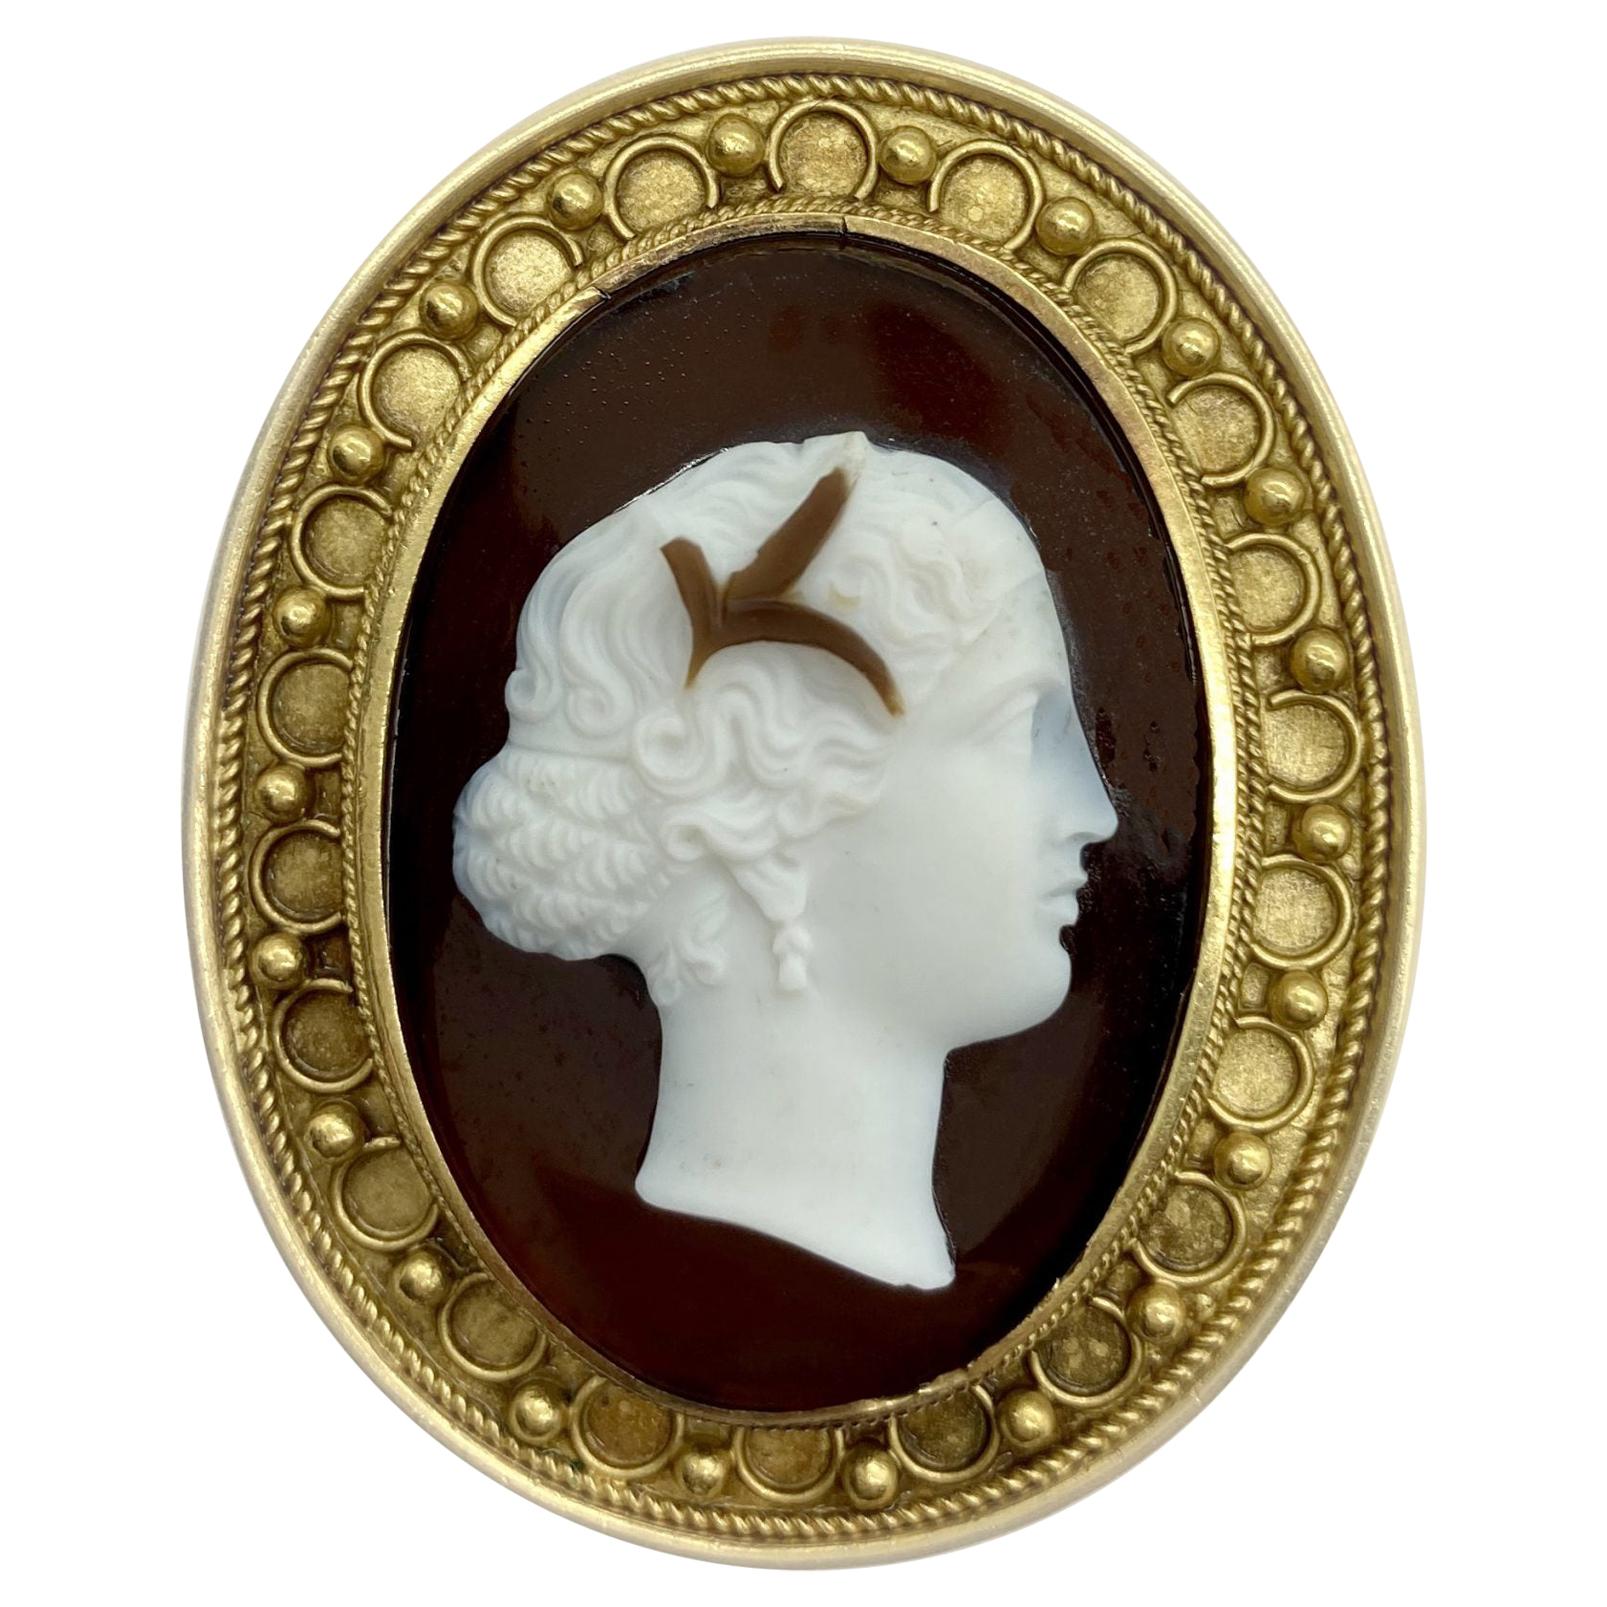 Etruscan Revival Cameo Brooch Pendant